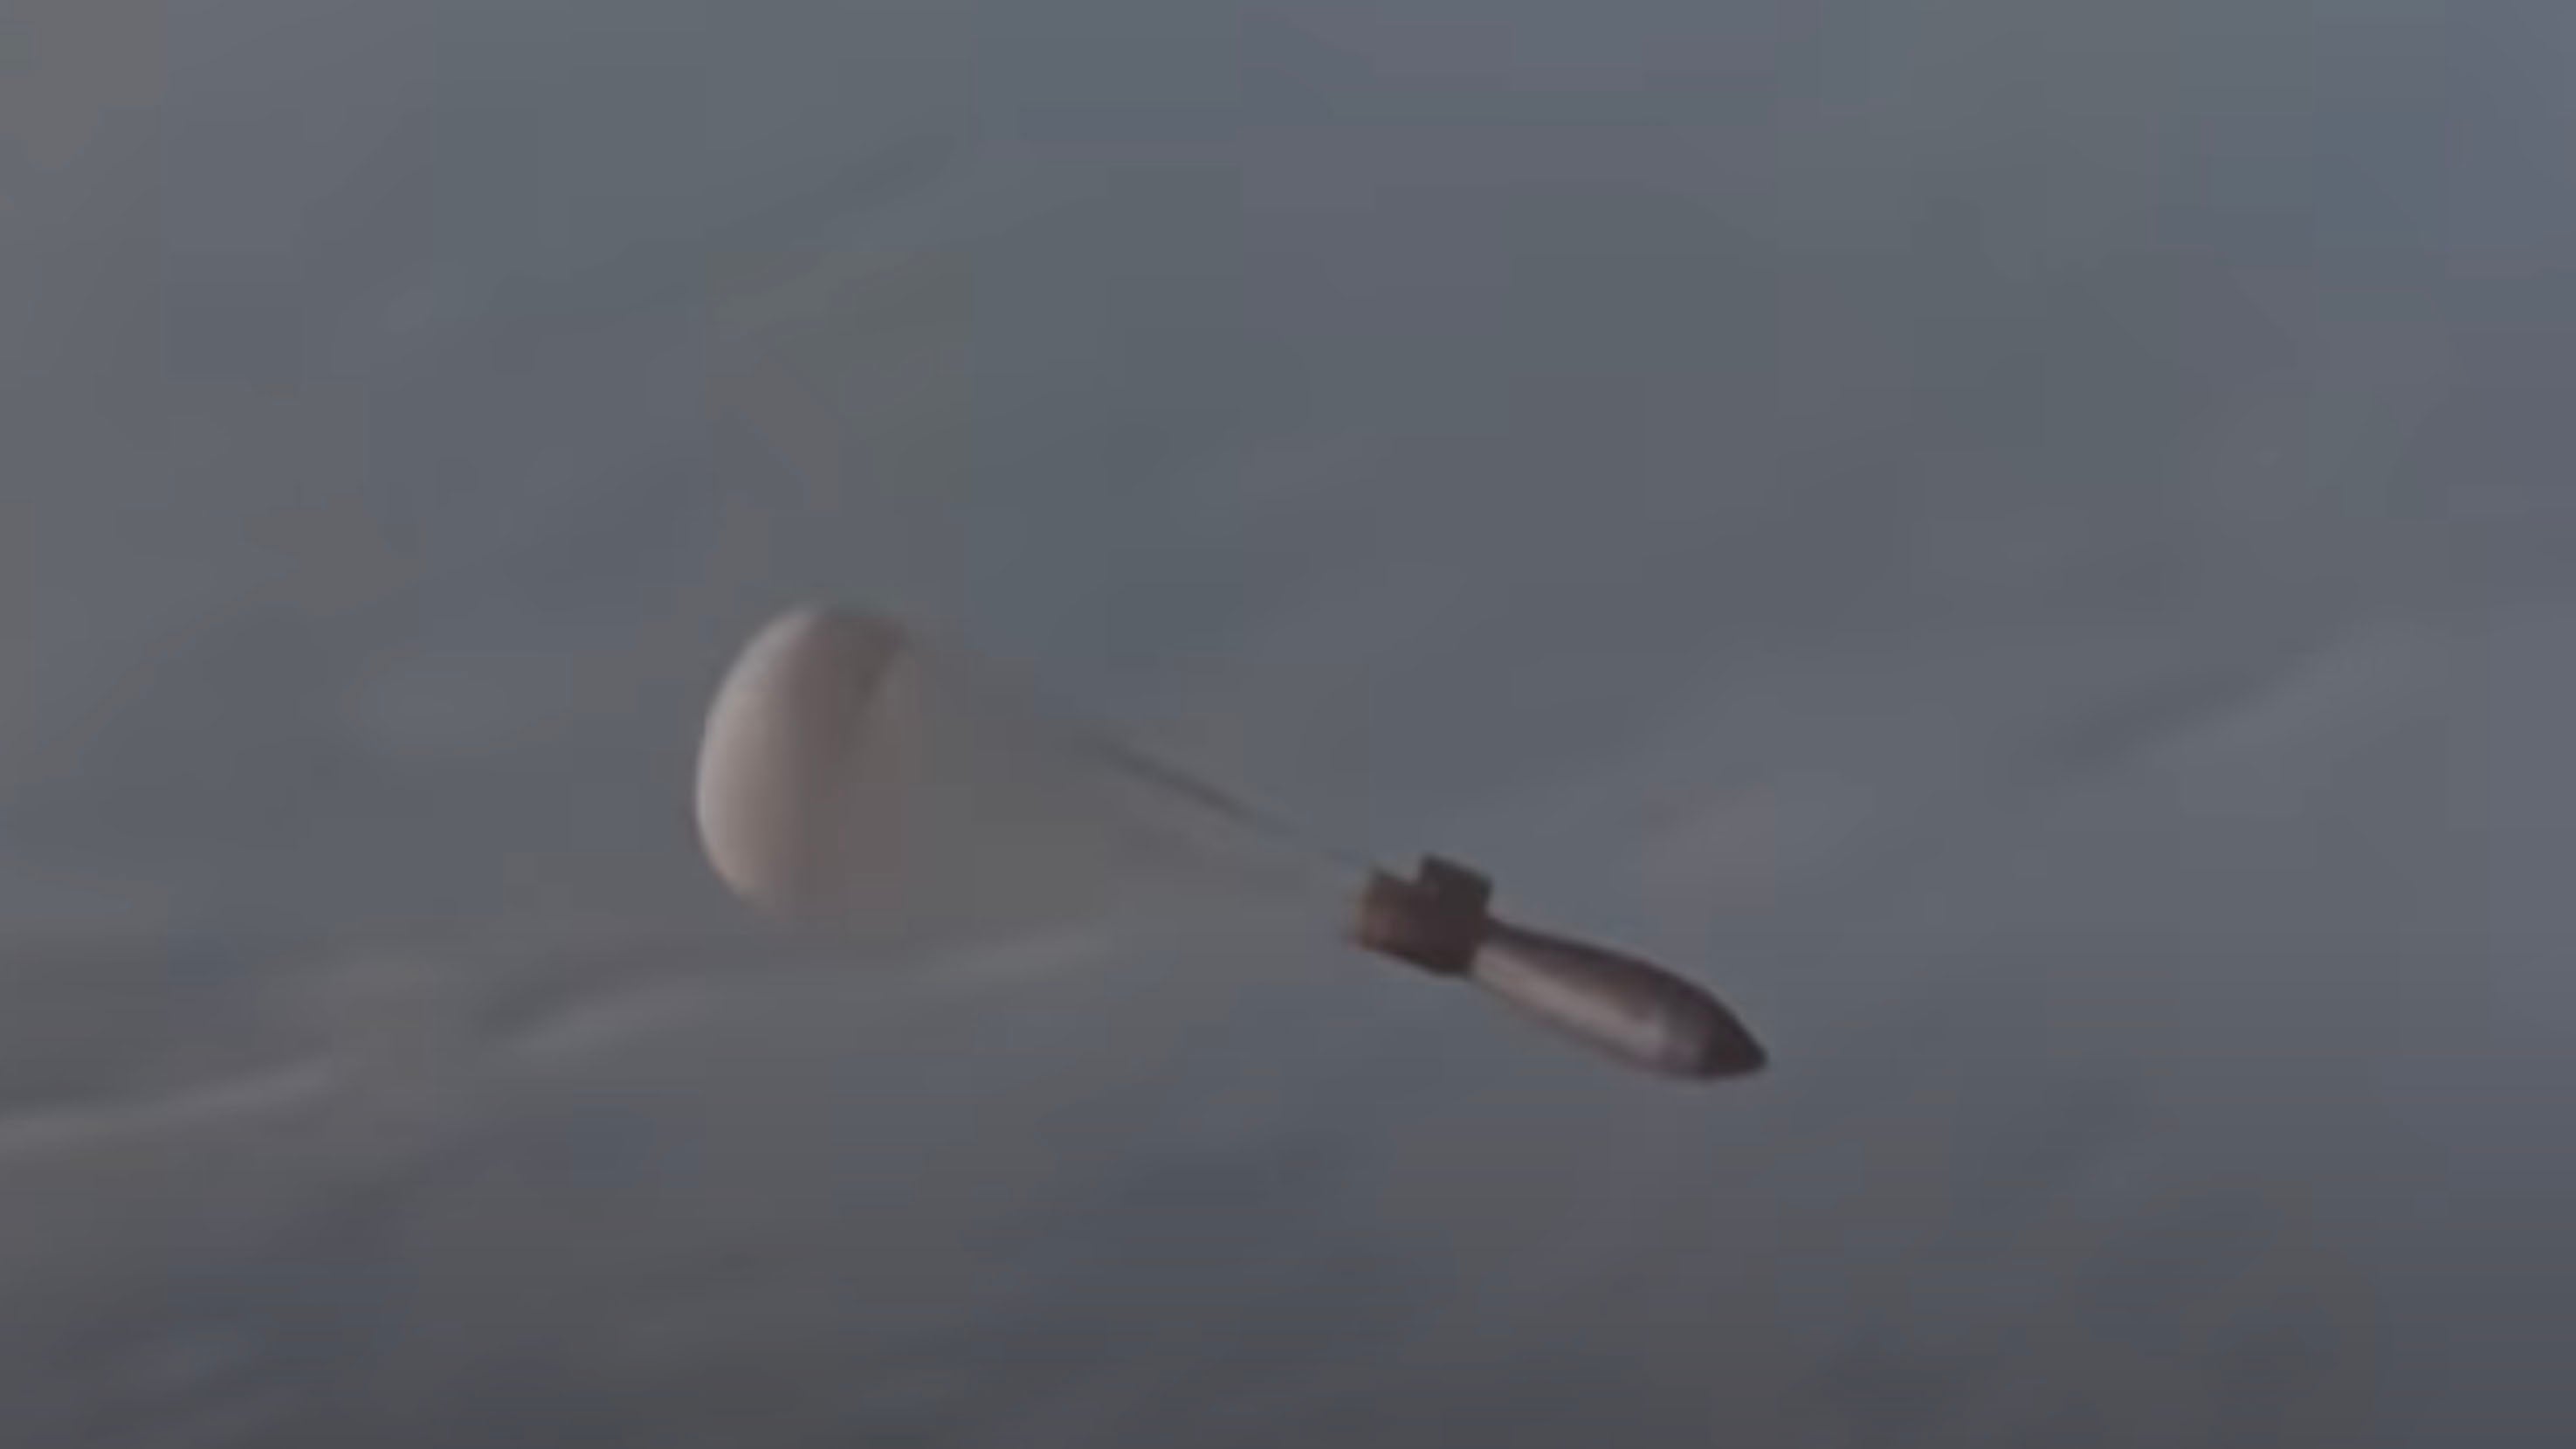 Russia Releases “Tsar Bomba” Test Footage Of The Most Powerful 